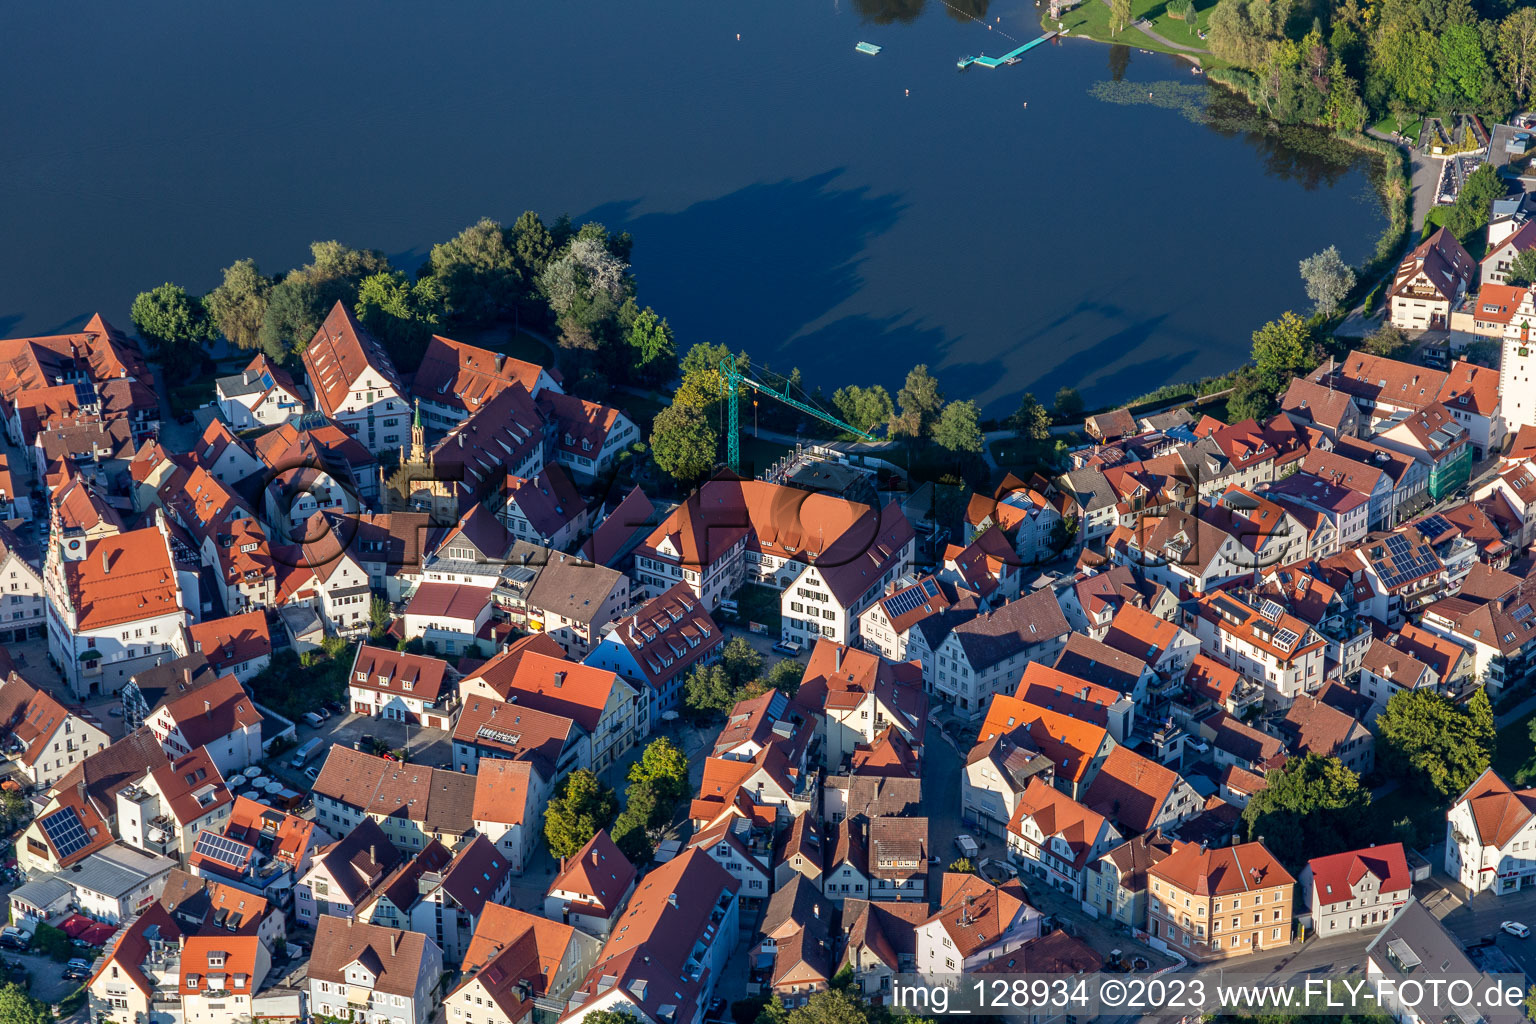 City view of the downtown area on the shore areas of Stadt See in Bad Waldsee in the state Baden-Wuerttemberg, Germany from above